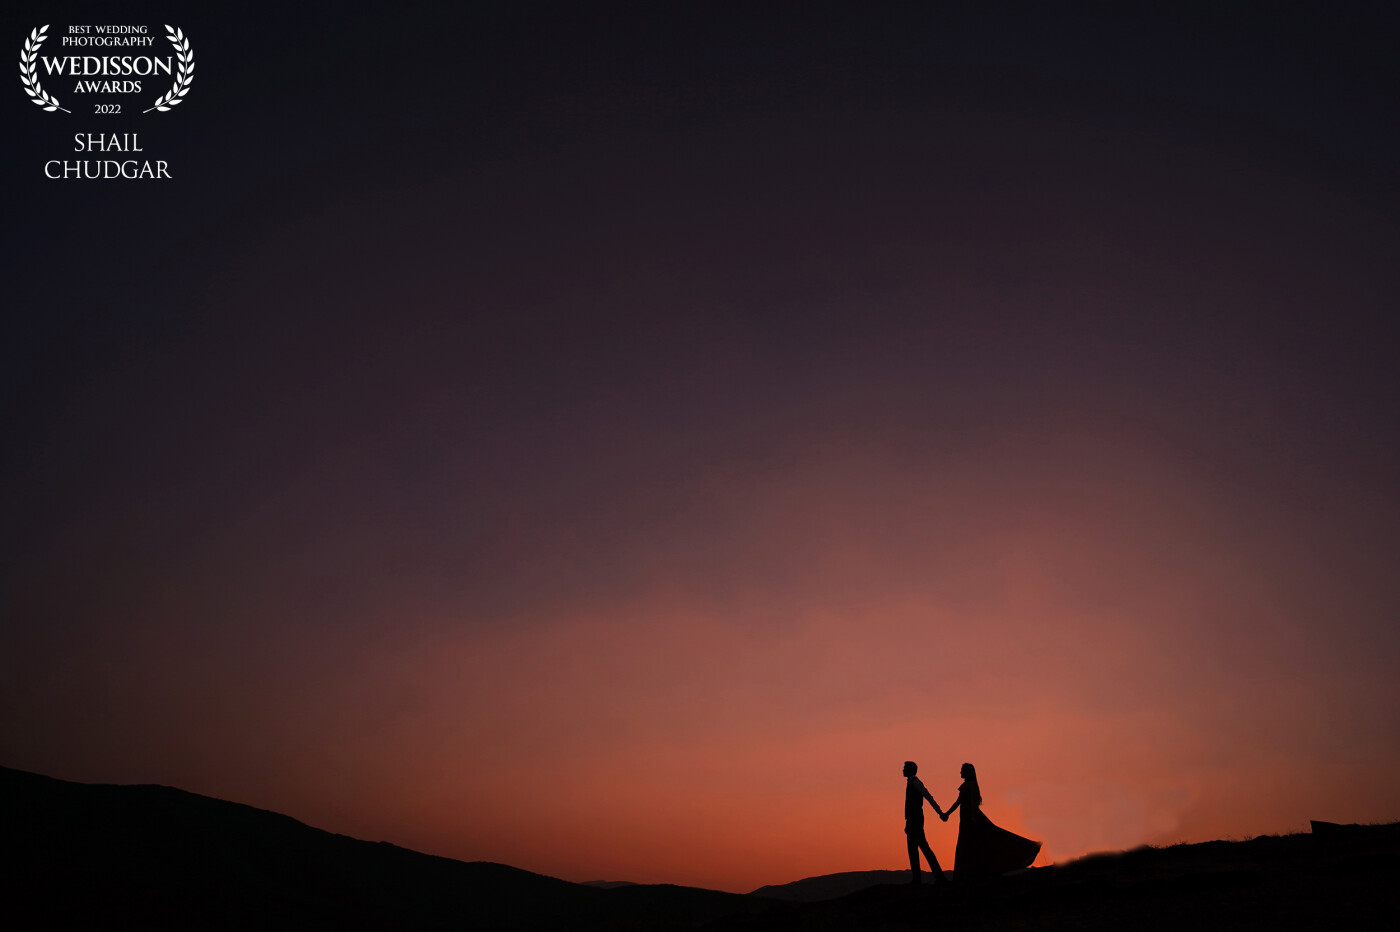 This was the end of the day and the last shot after sunset and the sky was to die for! I just told the couple to walk hand in hand on this hill and got a series of fantastic silhouettes.